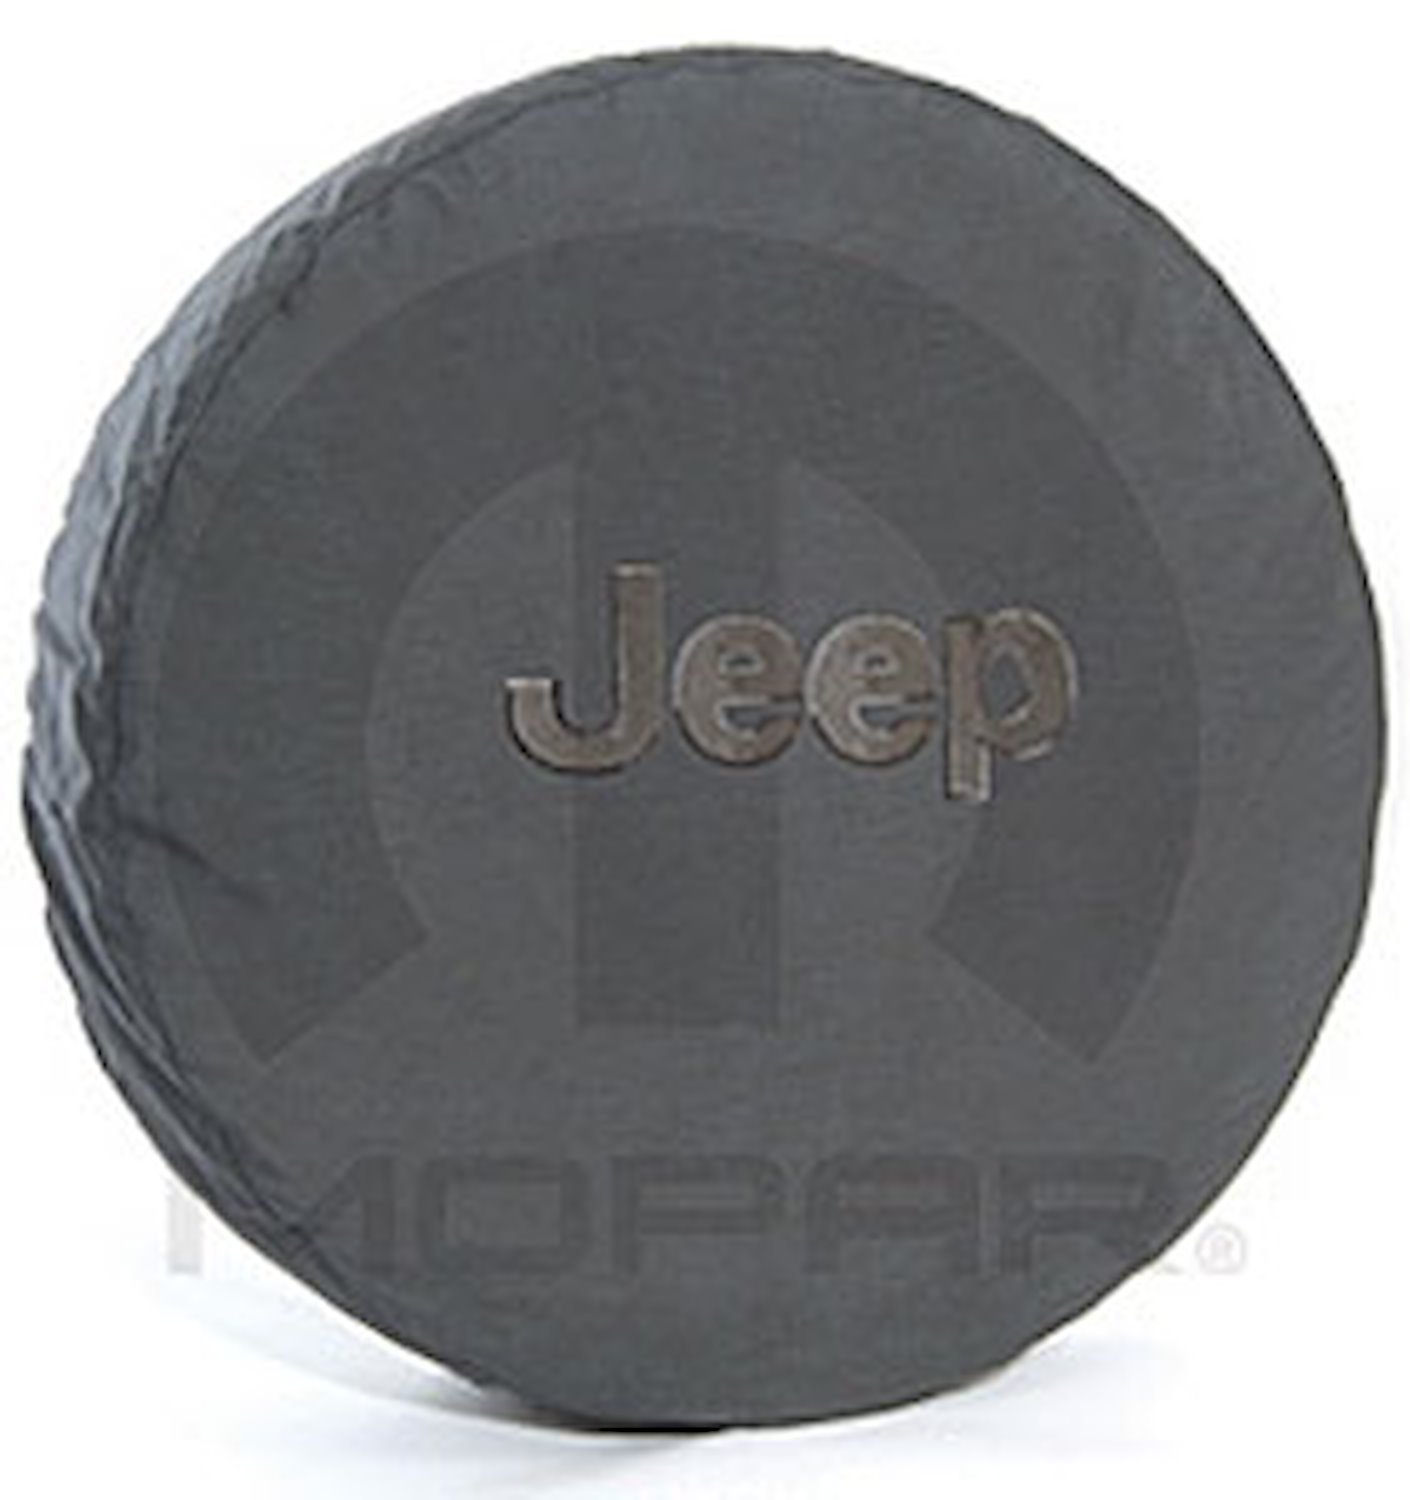 Spare Tire Cover - Deluxe Anti-Theft 2007-13 Jeep